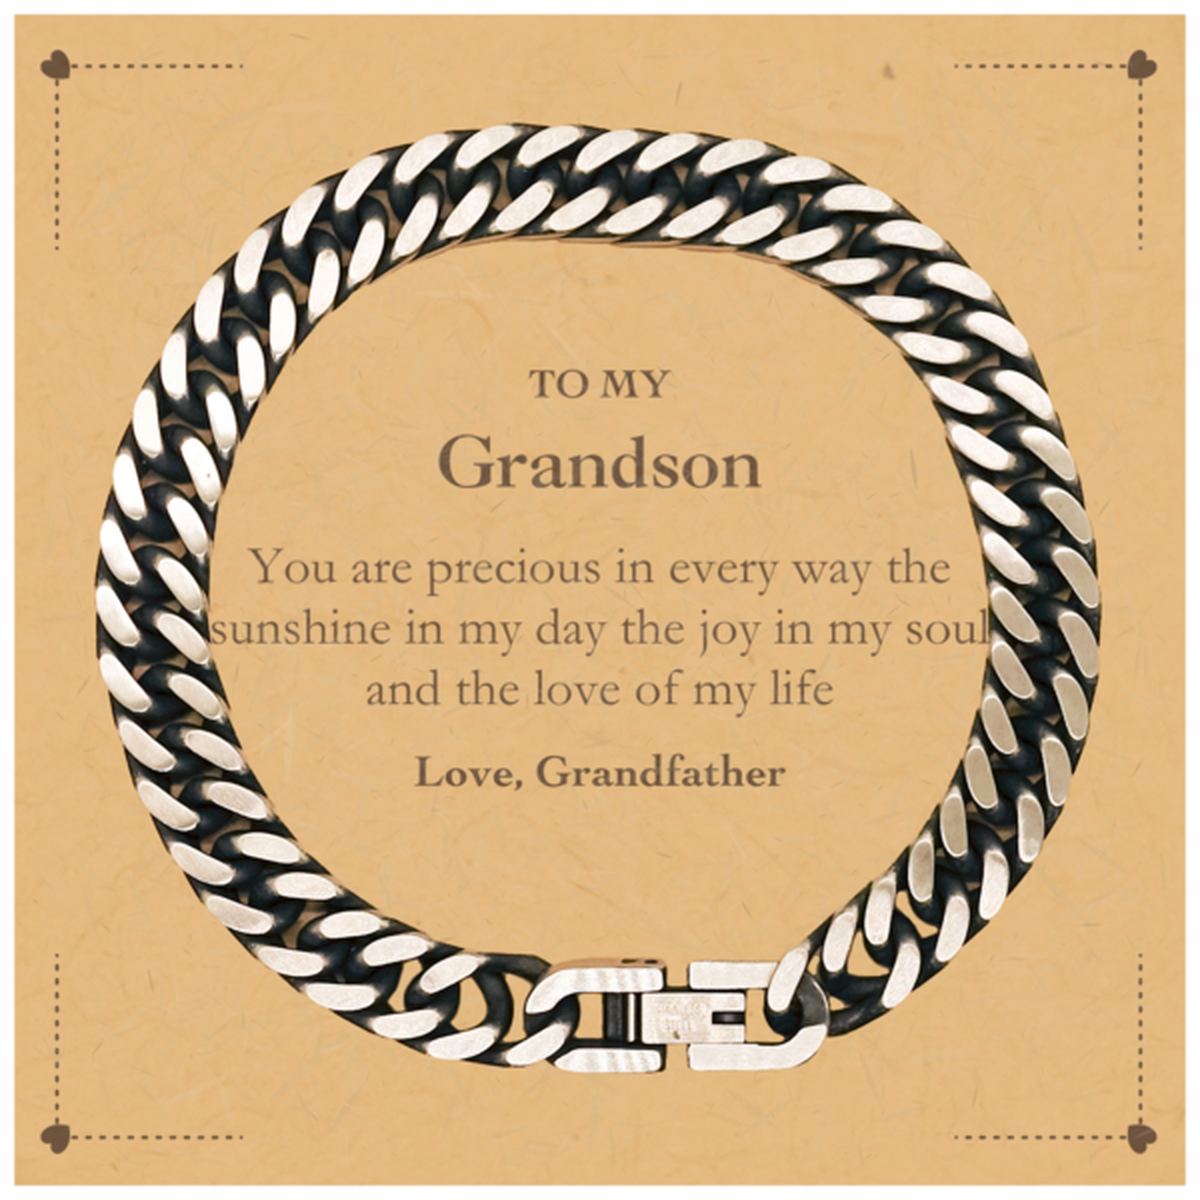 Graduation Gifts for Grandson Cuban Link Chain Bracelet Present from Grandfather, Christmas Grandson Birthday Gifts Grandson You are precious in every way the sunshine in my day. Love, Grandfather